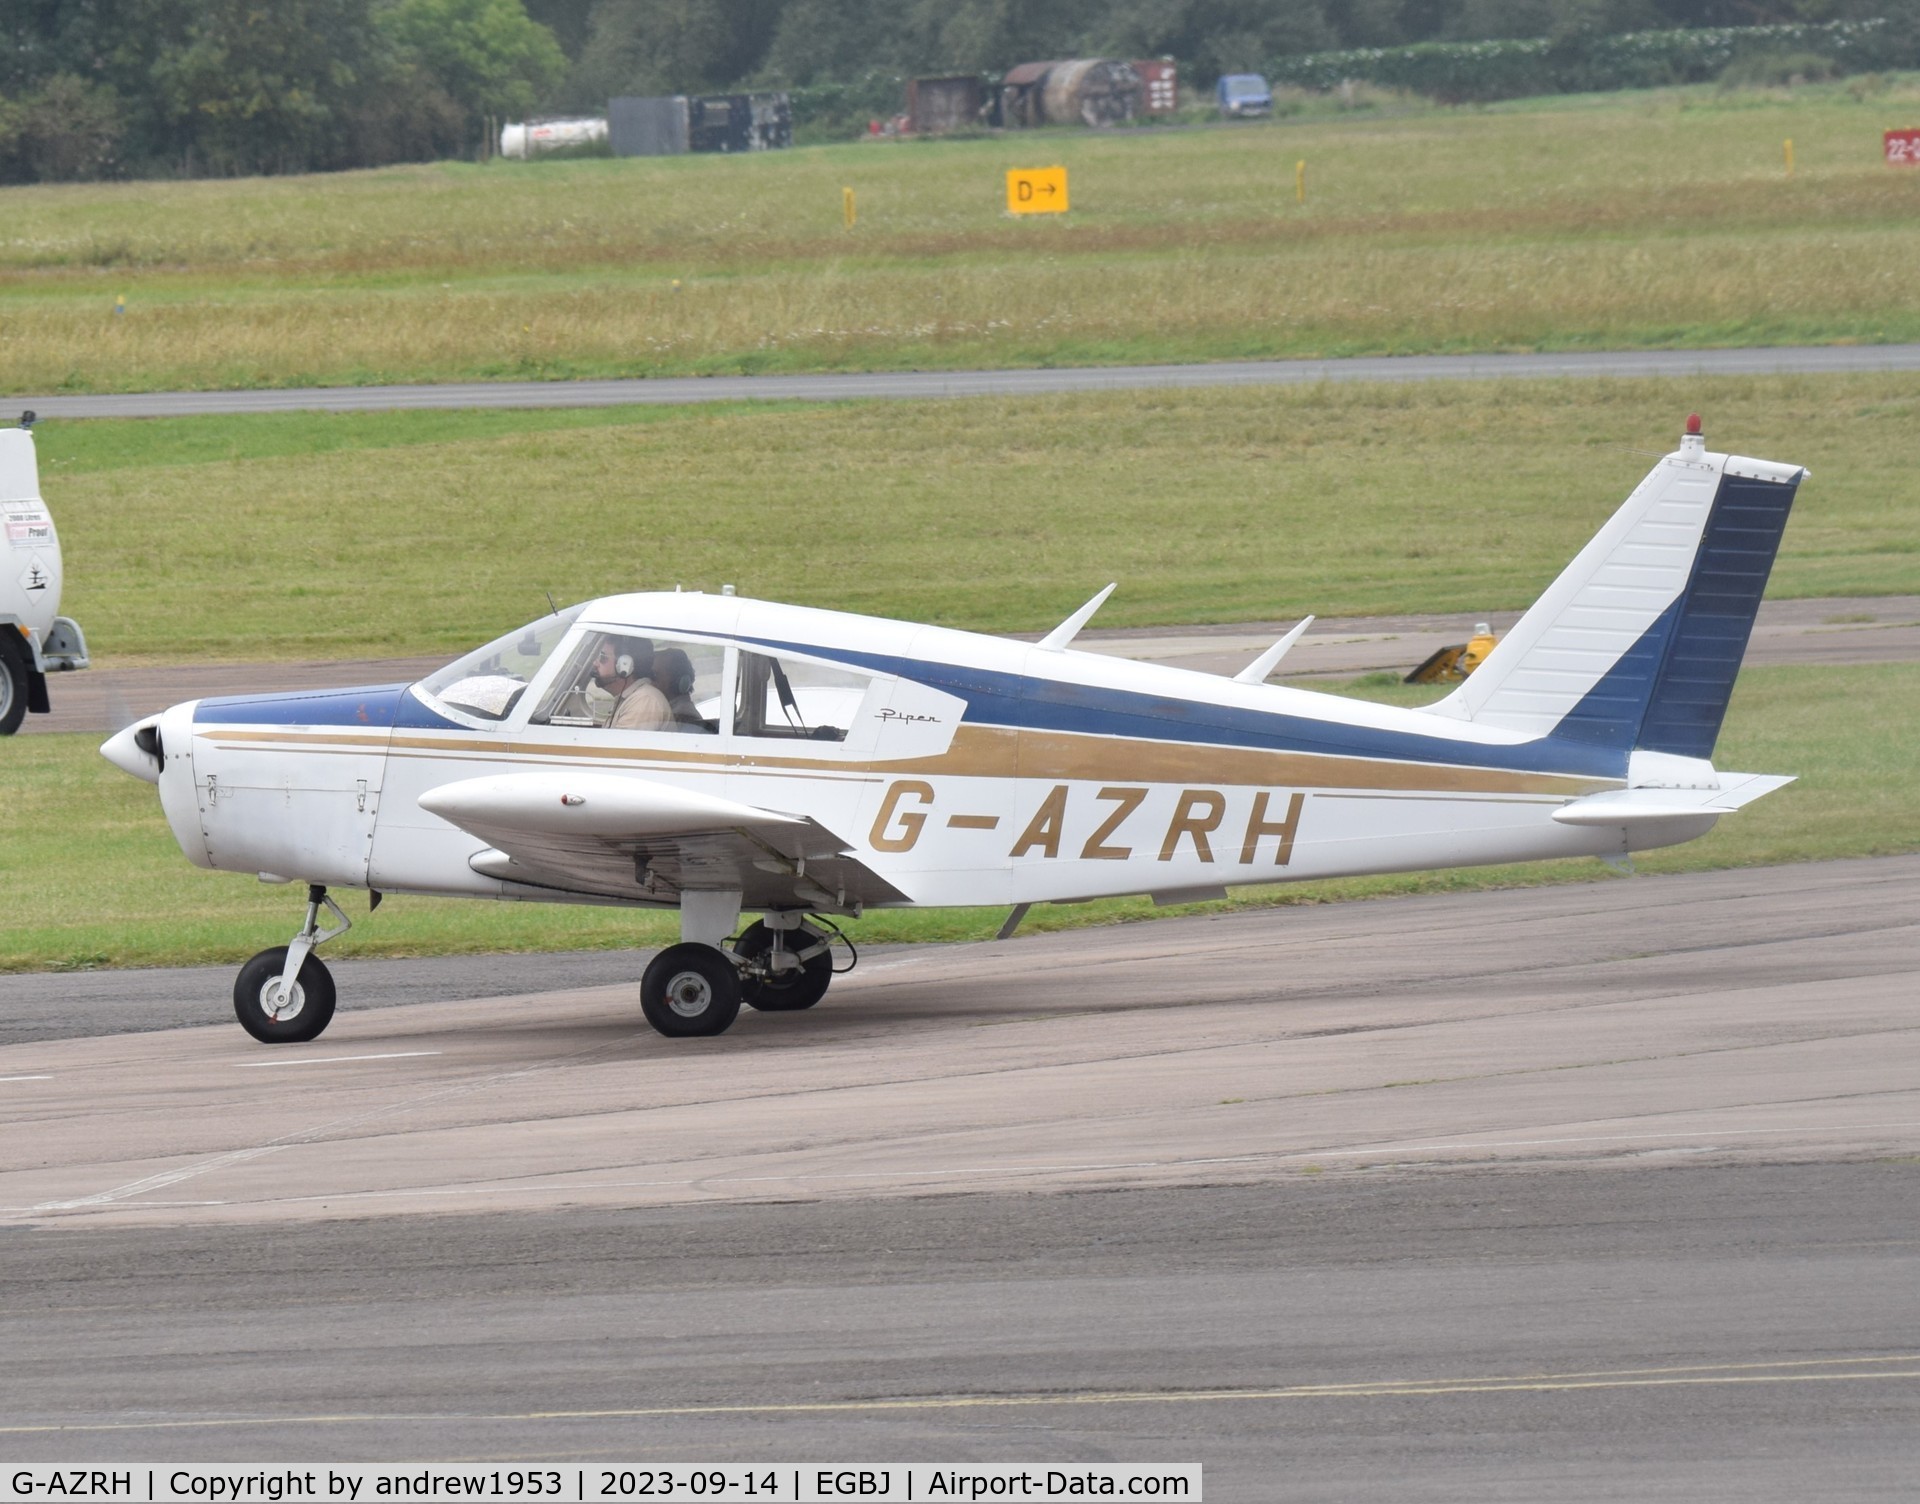 G-AZRH, 1971 Piper PA-28-140 Cherokee C/N 28-7125585, G-AZRH at Gloucestershire Airport.